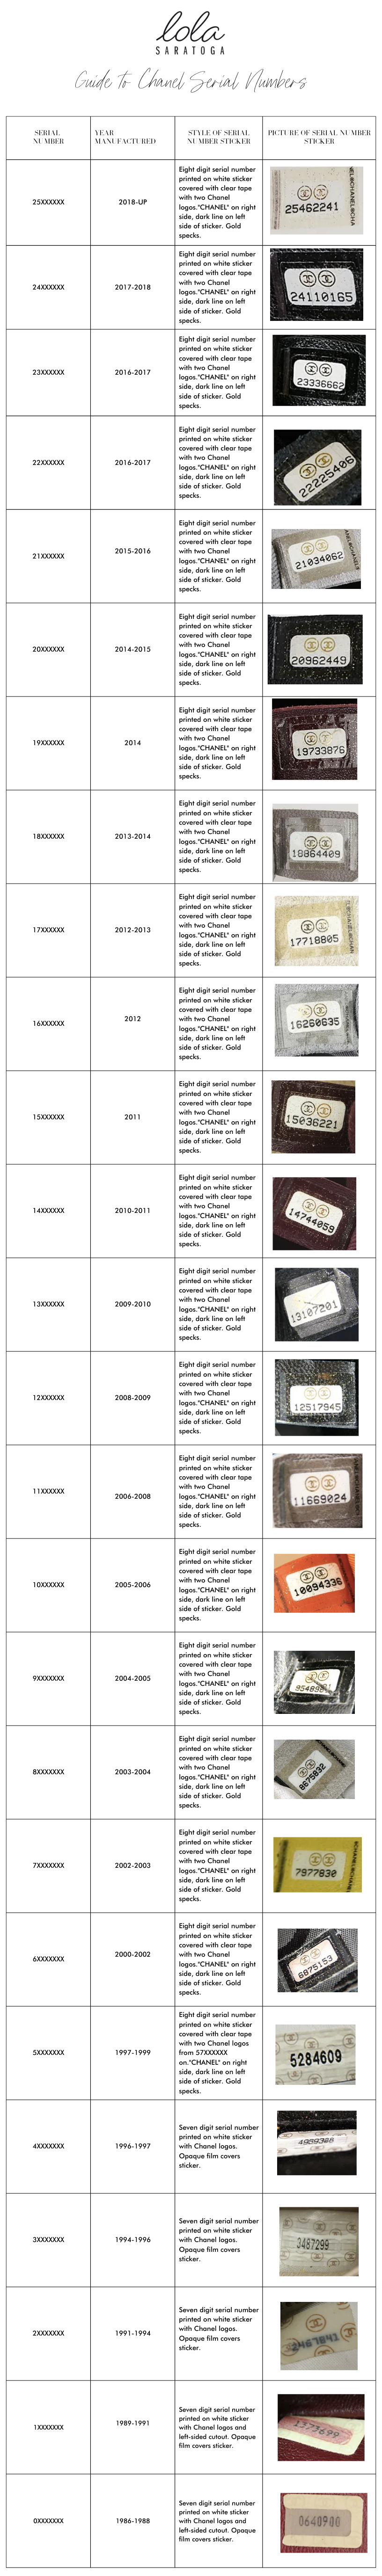 Chanel Serial Number Guide - Luxe Du Jour